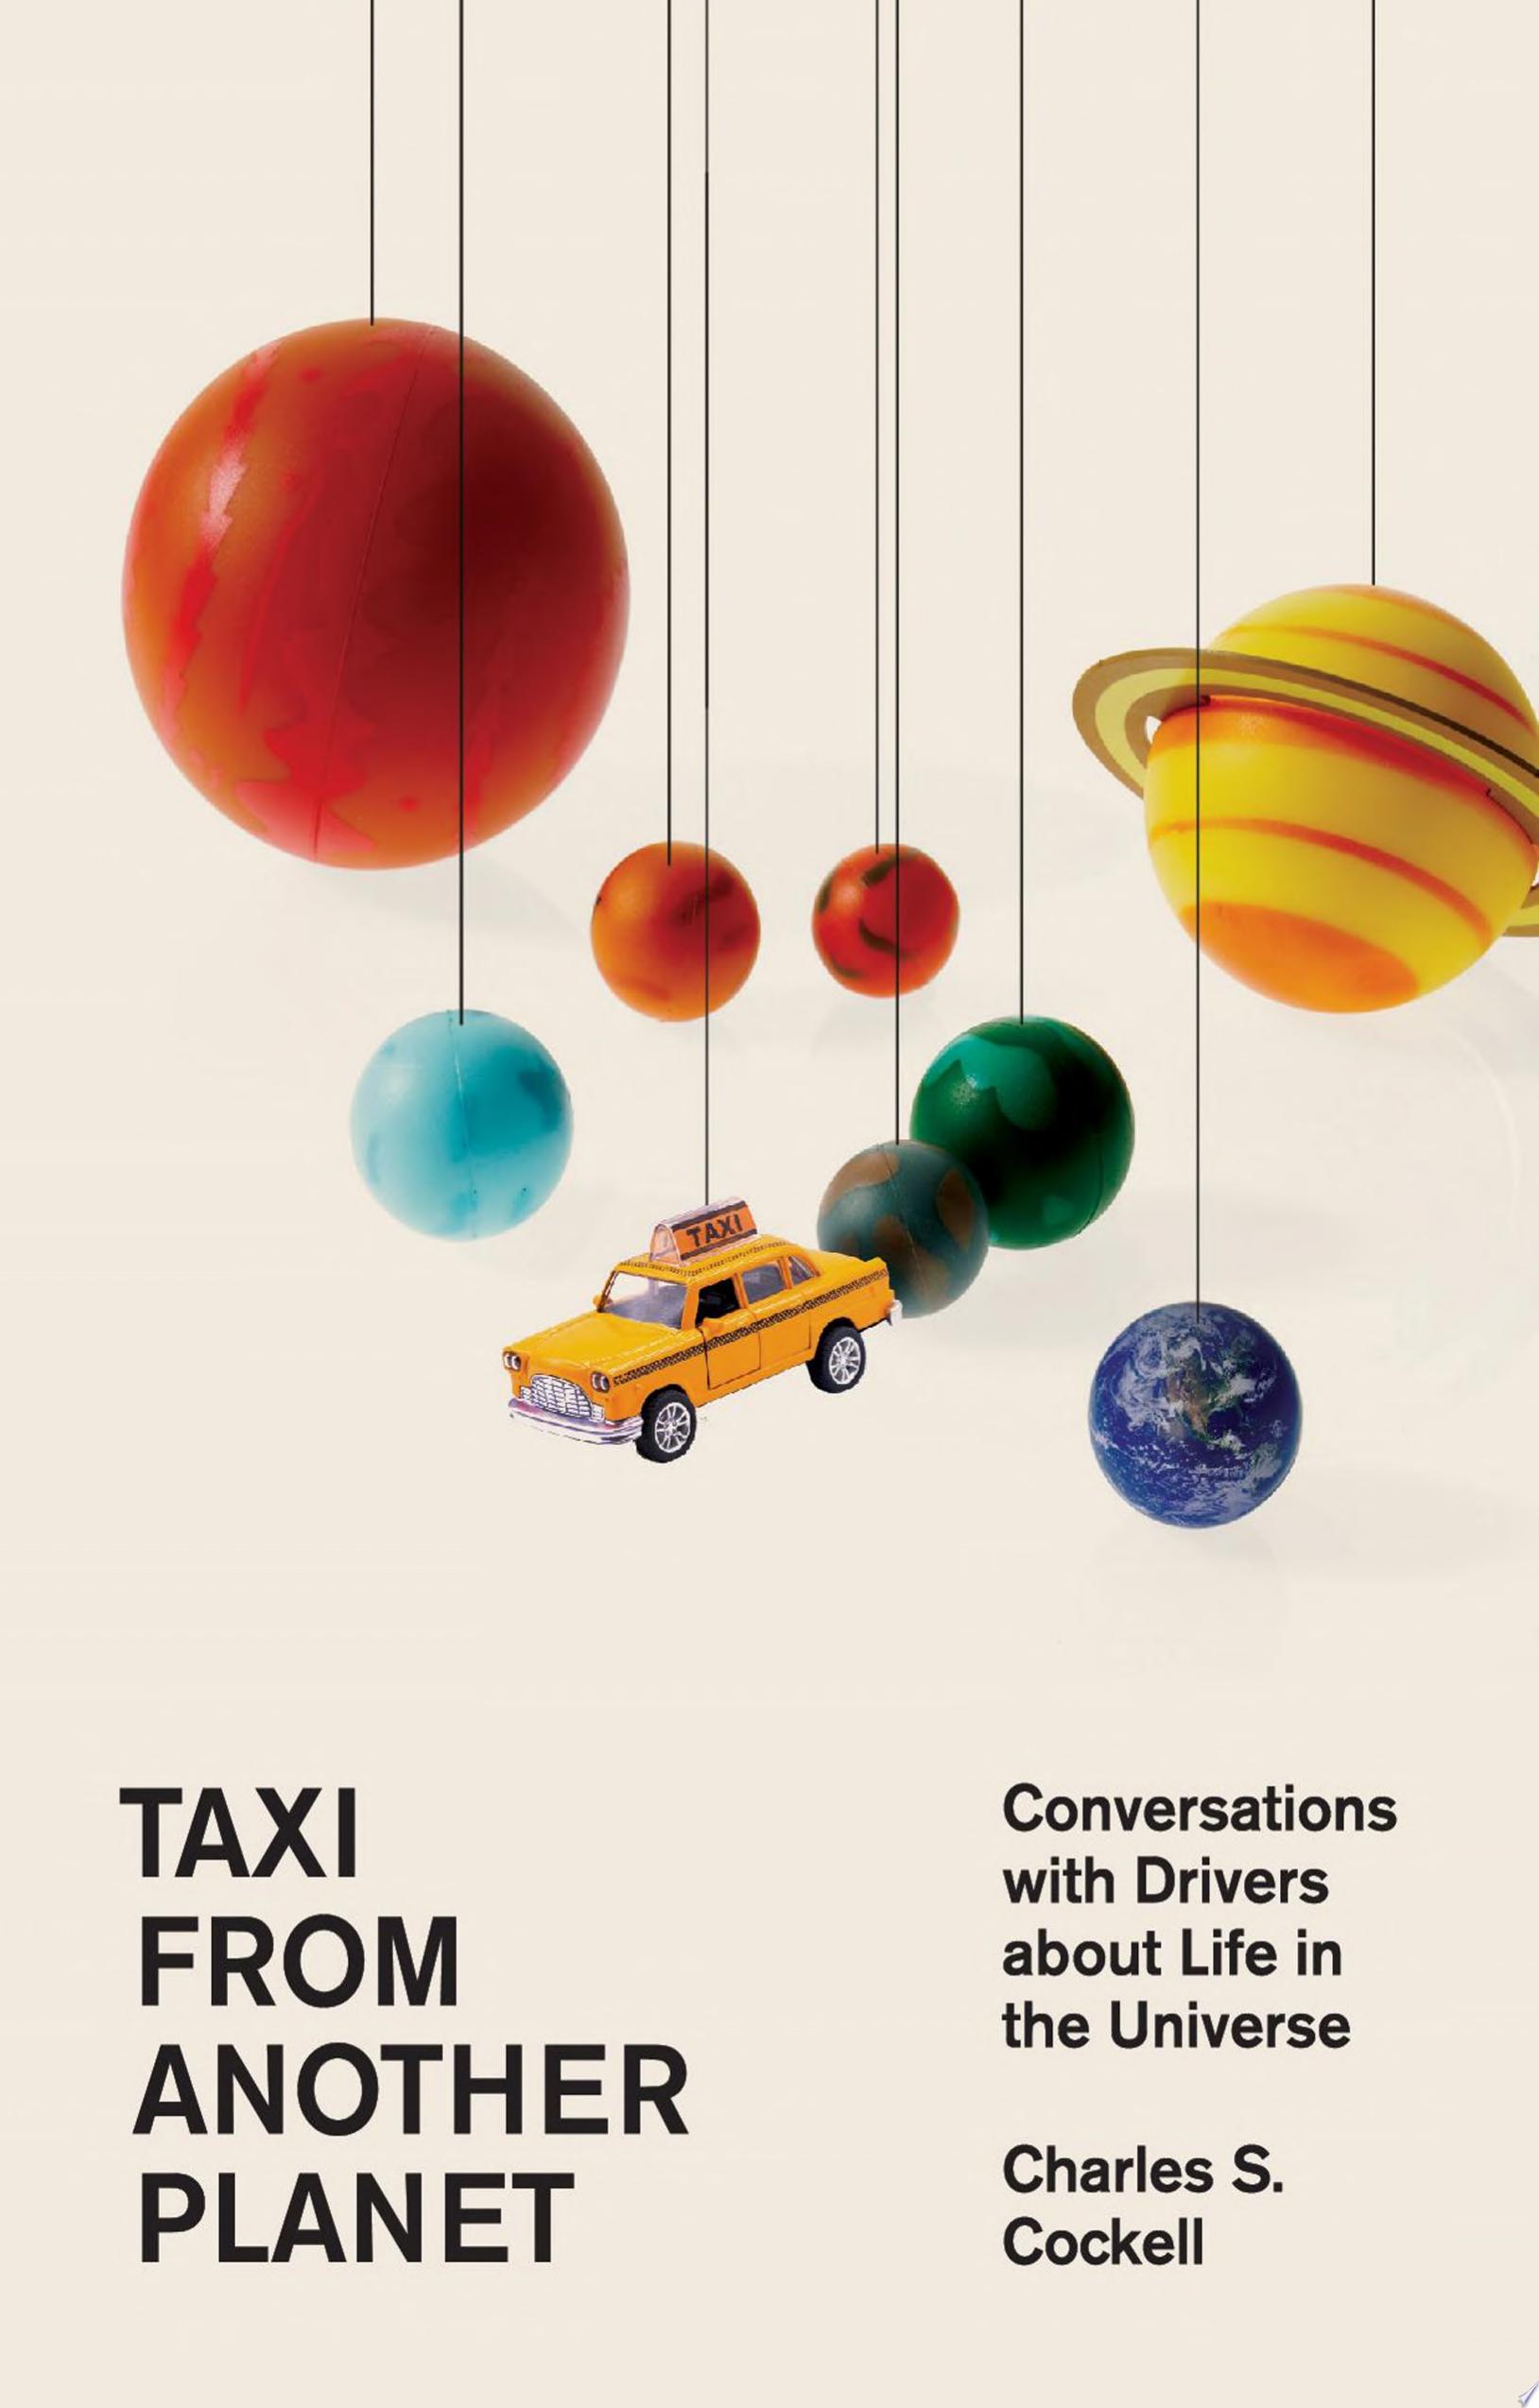 Image for "Taxi from Another Planet"